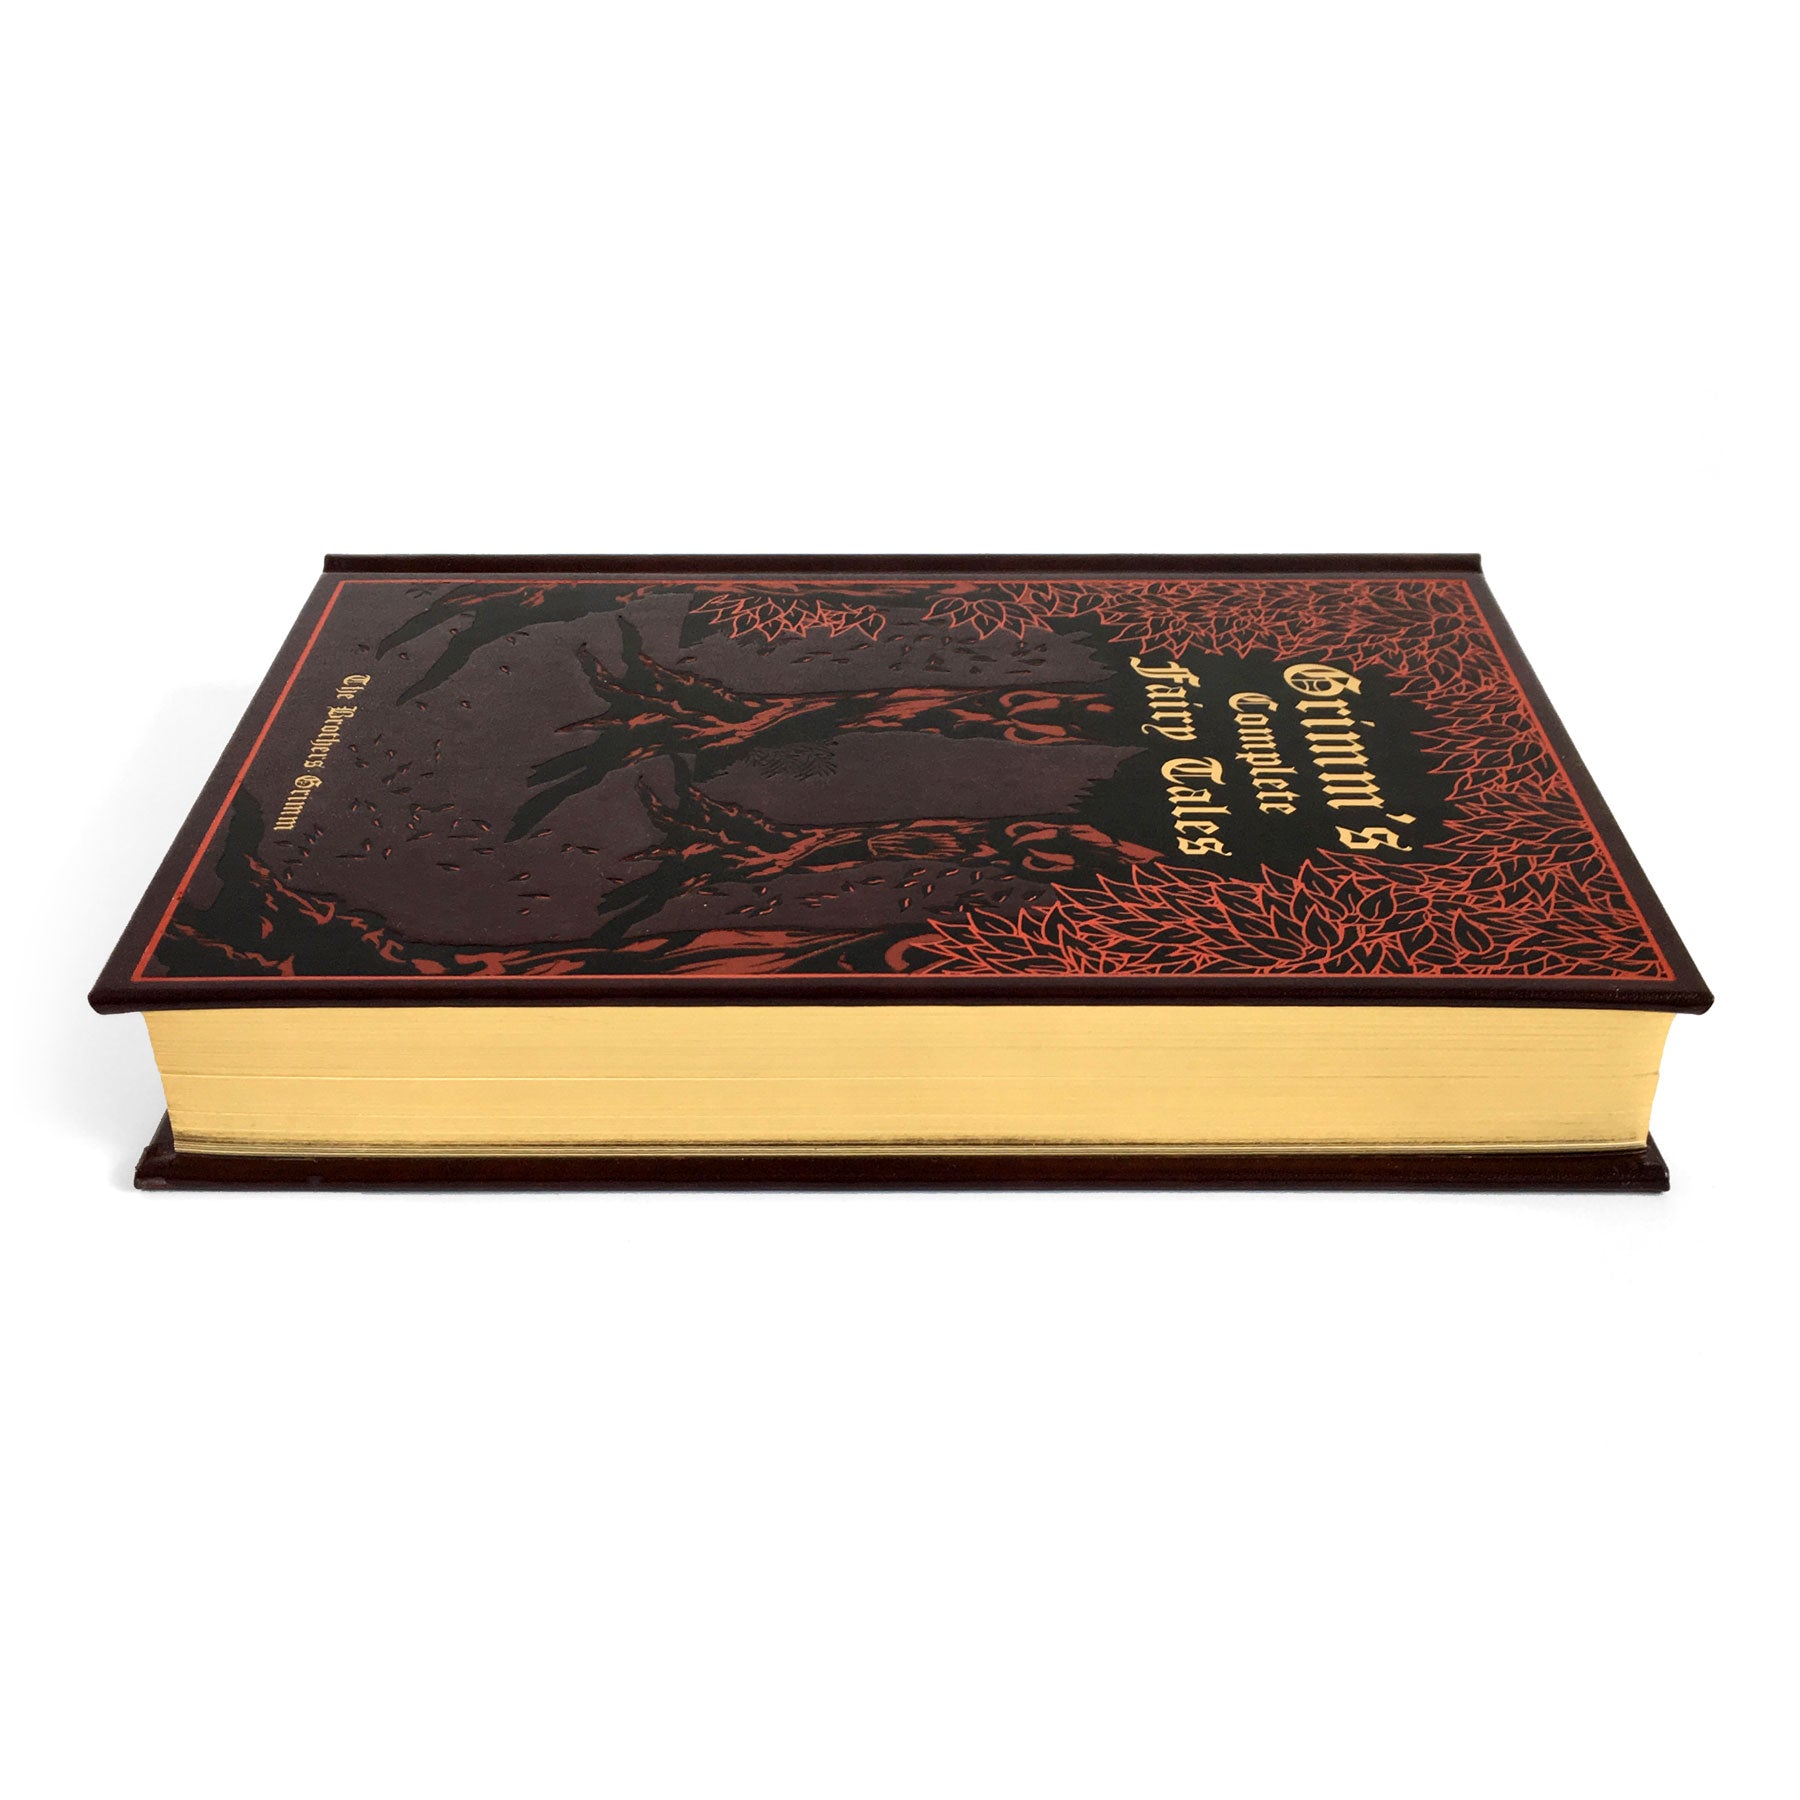 Grimm's Complete Fairy Tales Leather Bound Edition